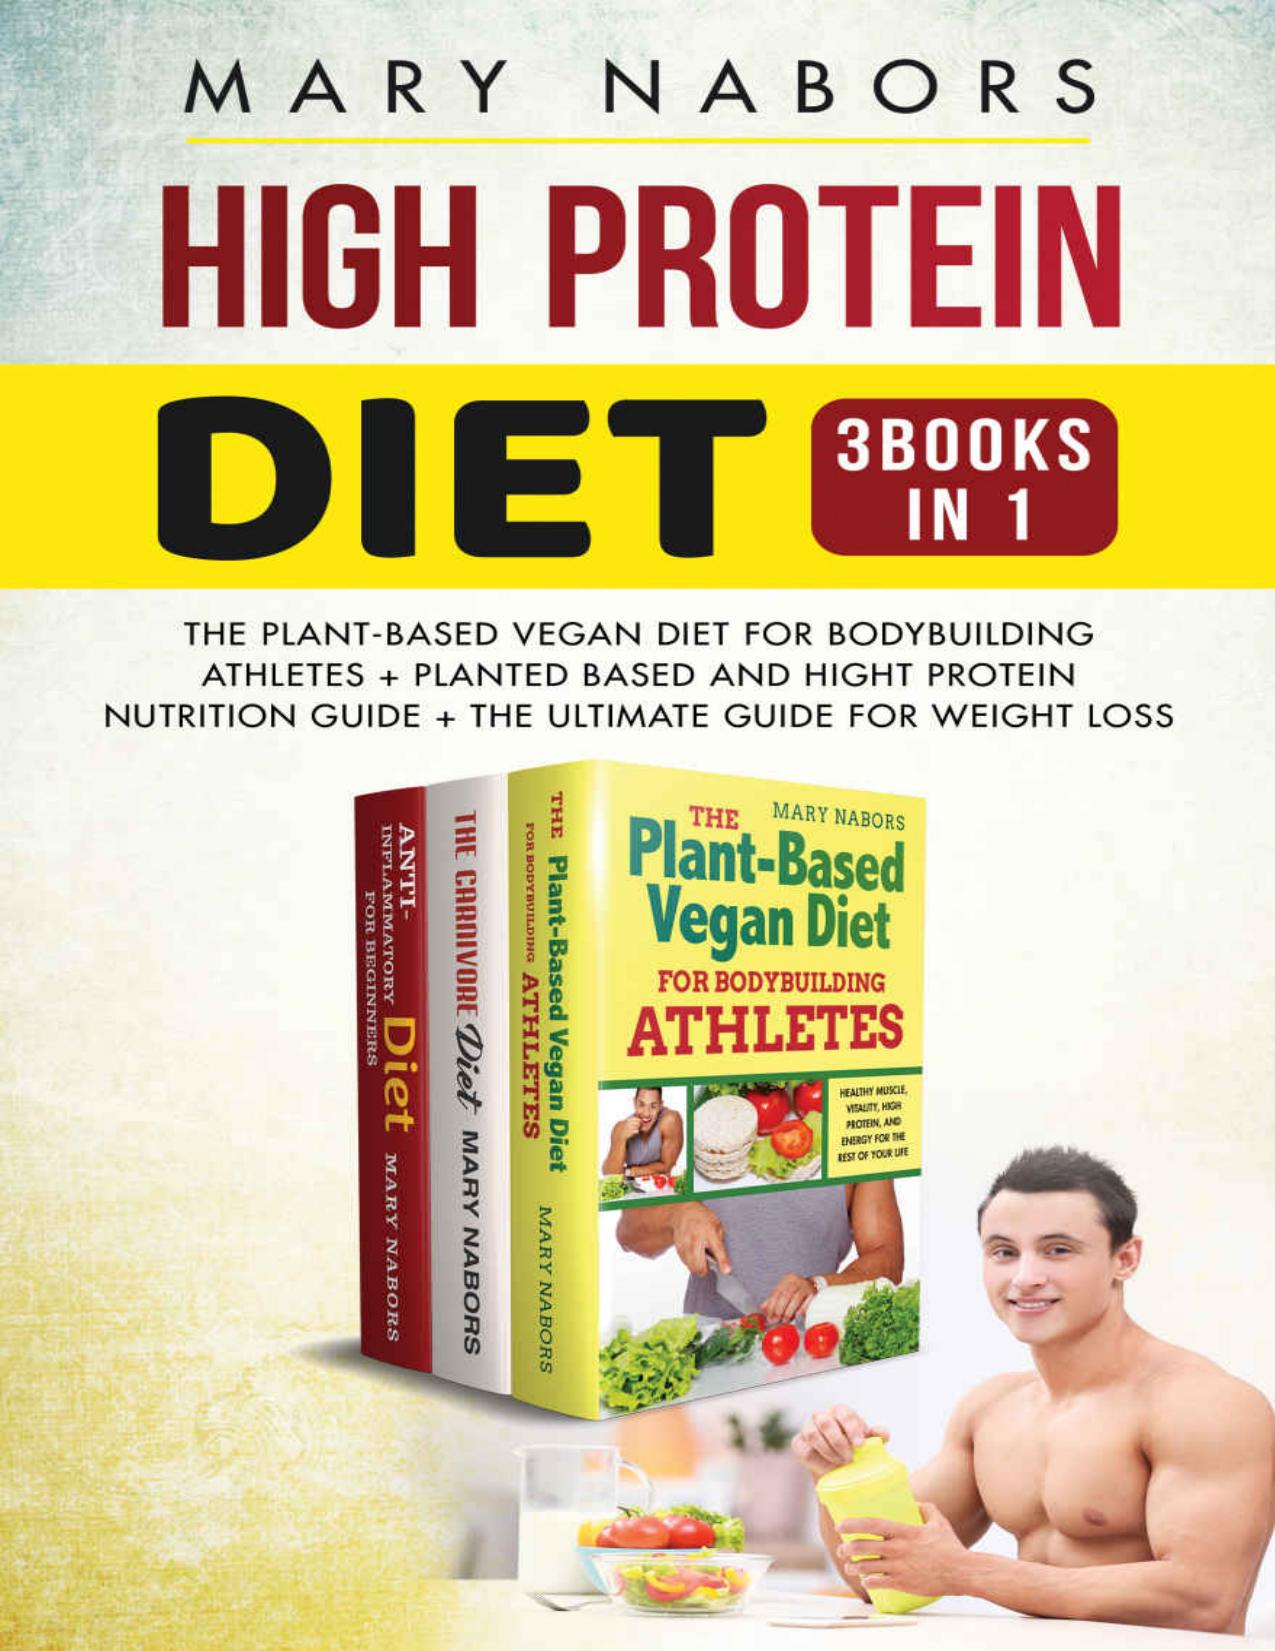 High Protein Diet (3 Books in 1): The Plant-Based Vegan Diet for Bodybuilding Athletes + Planted Based and Hight Protein Nutrition Guide + The Ultimate Guide for Weight Loss by Mary Nabors